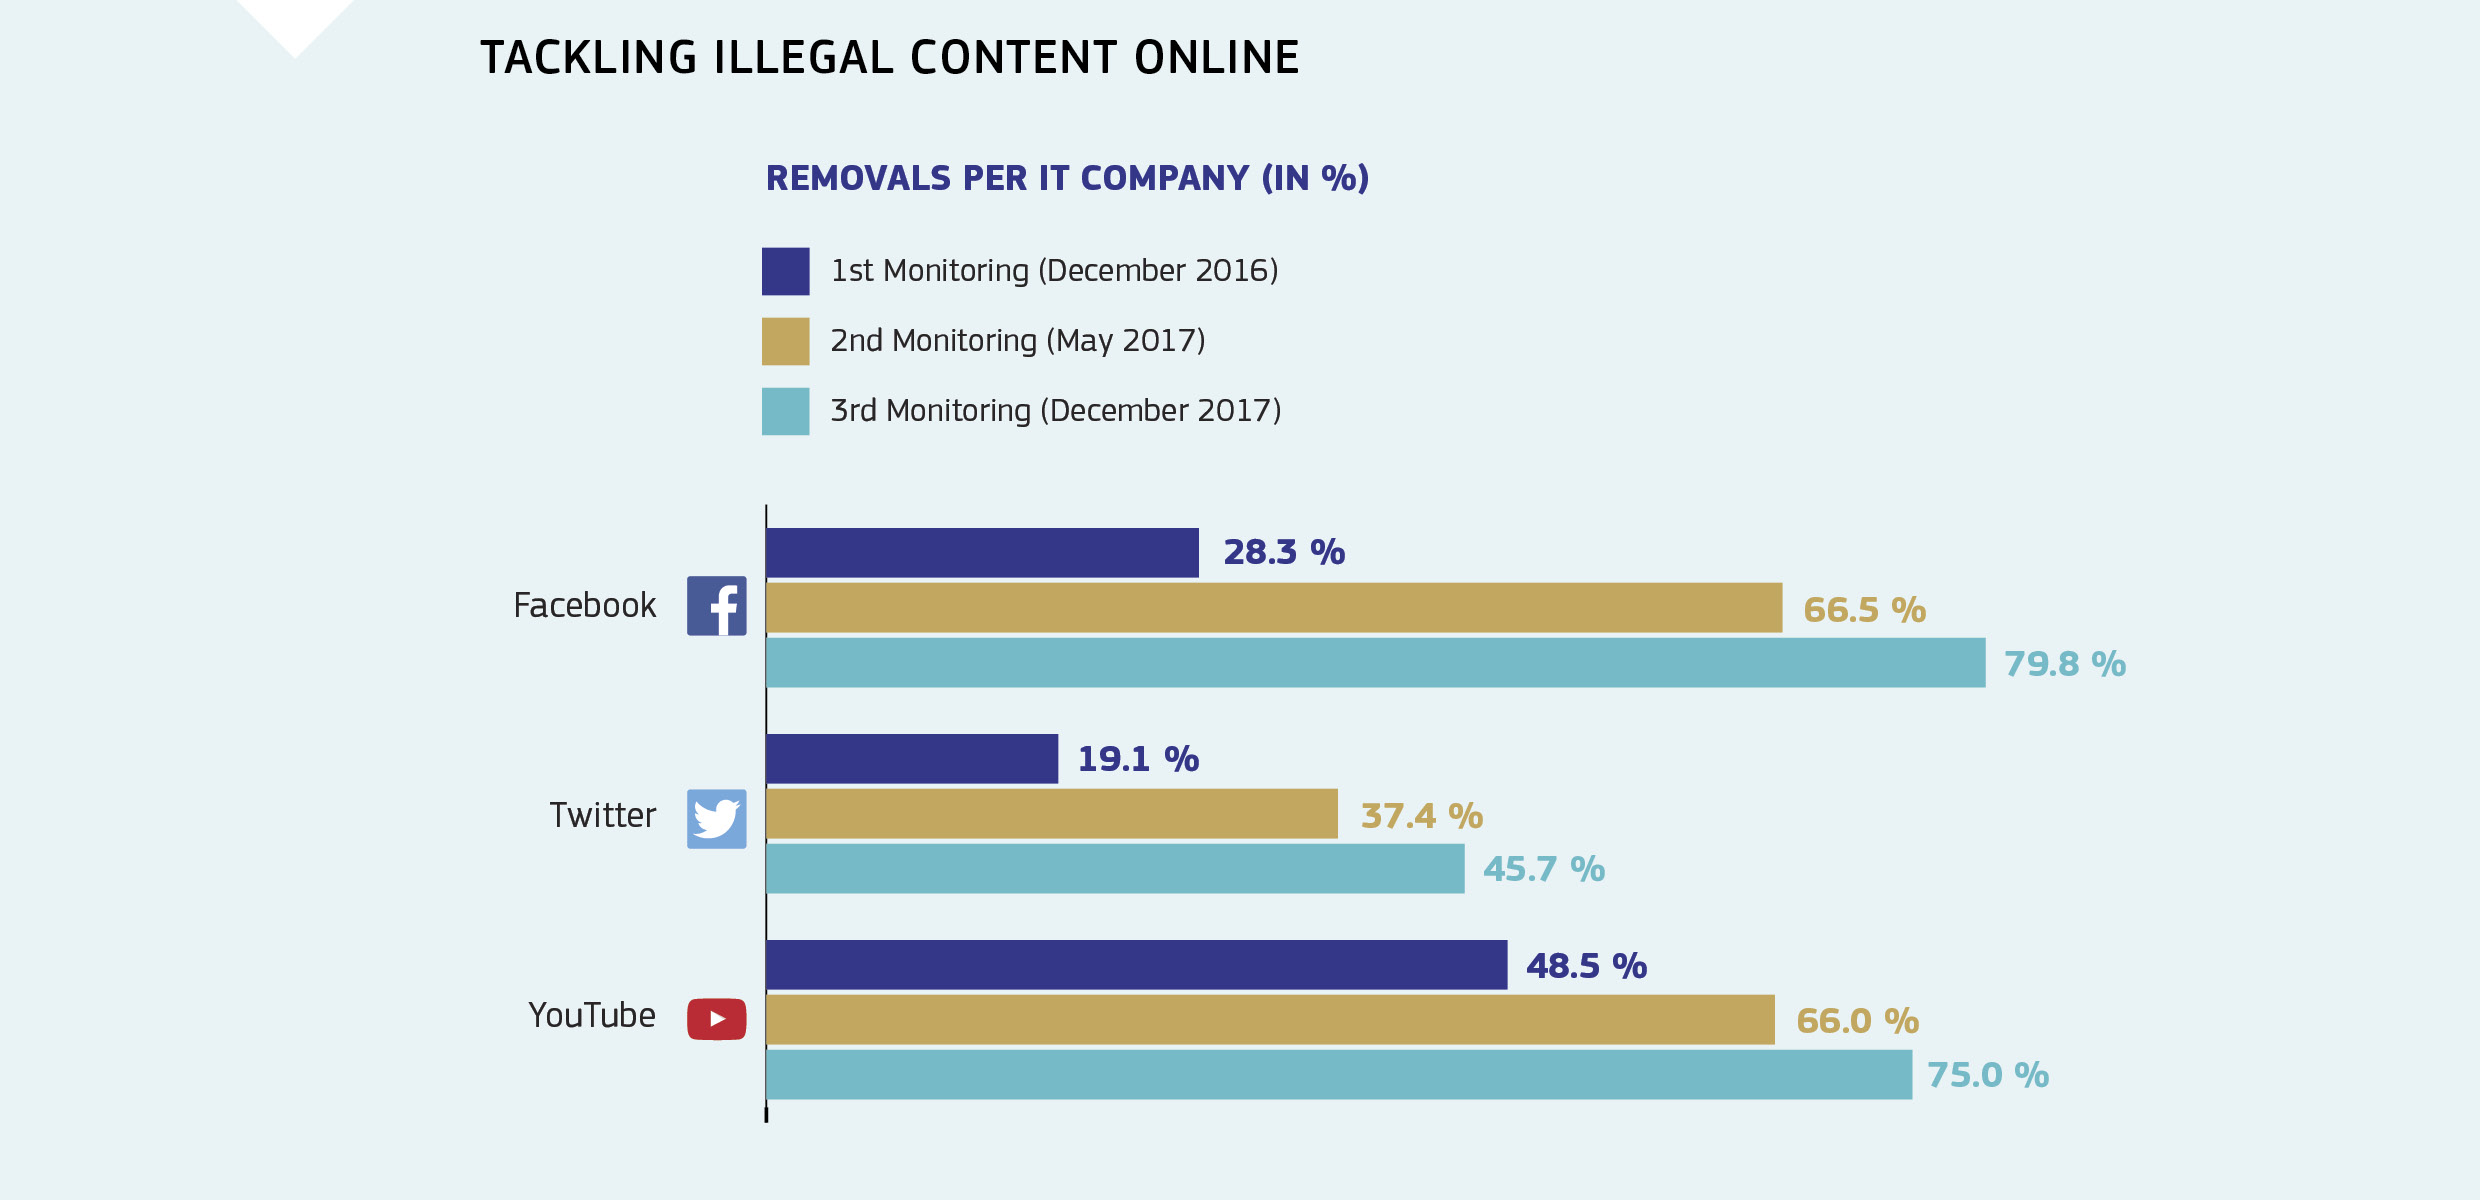 Tackling illegal content online